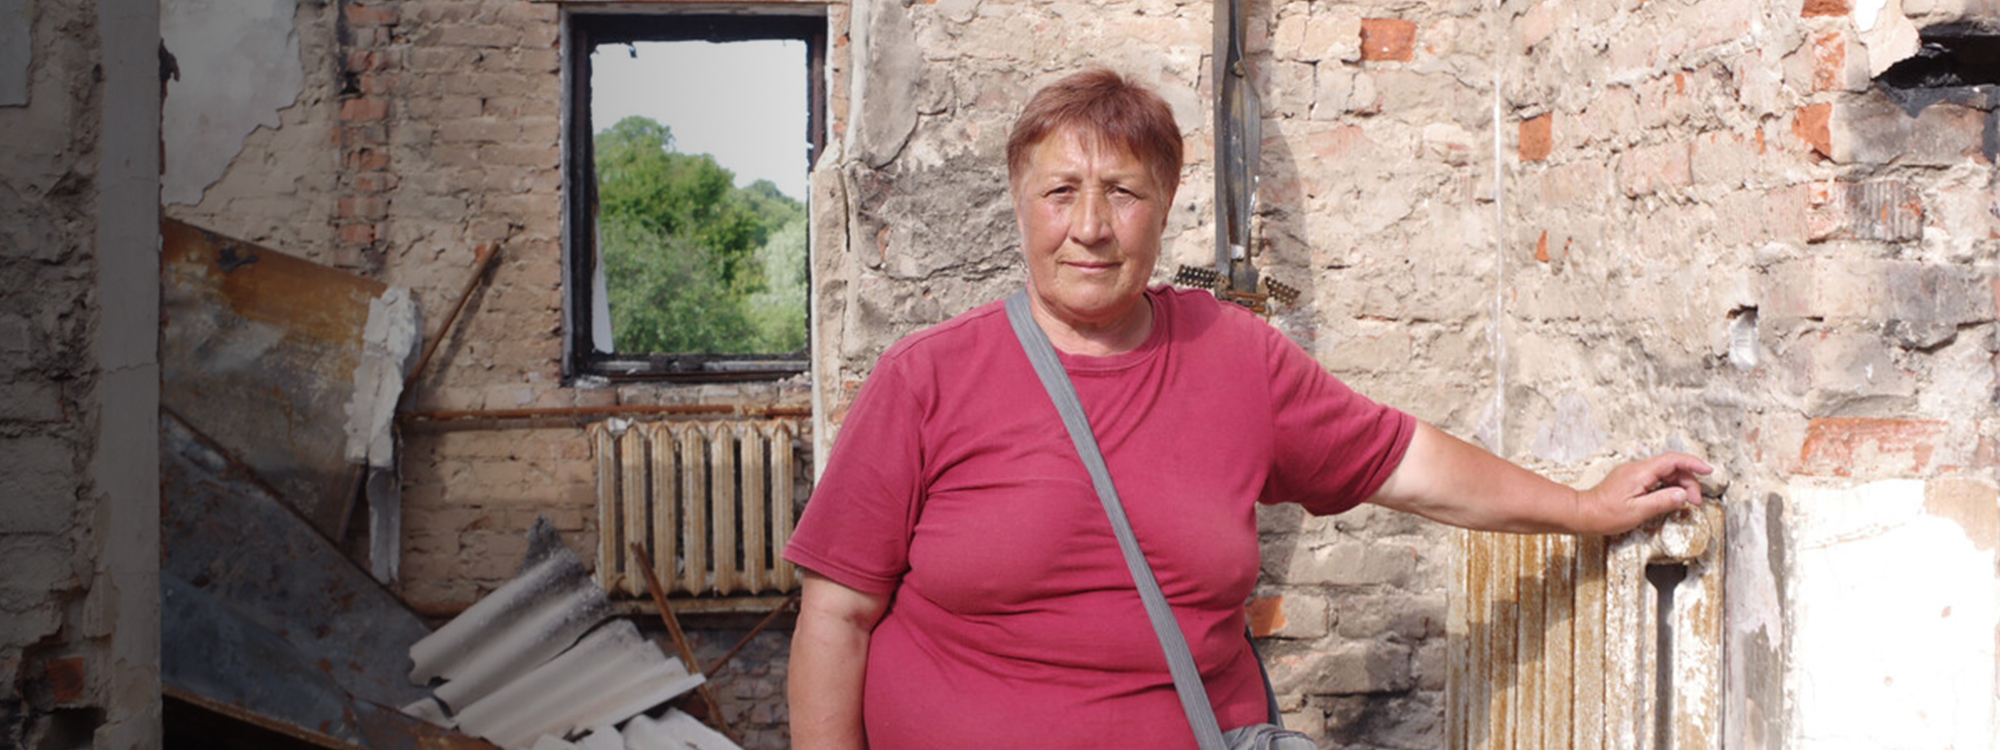 Woman standing in the middle of a destroyed home